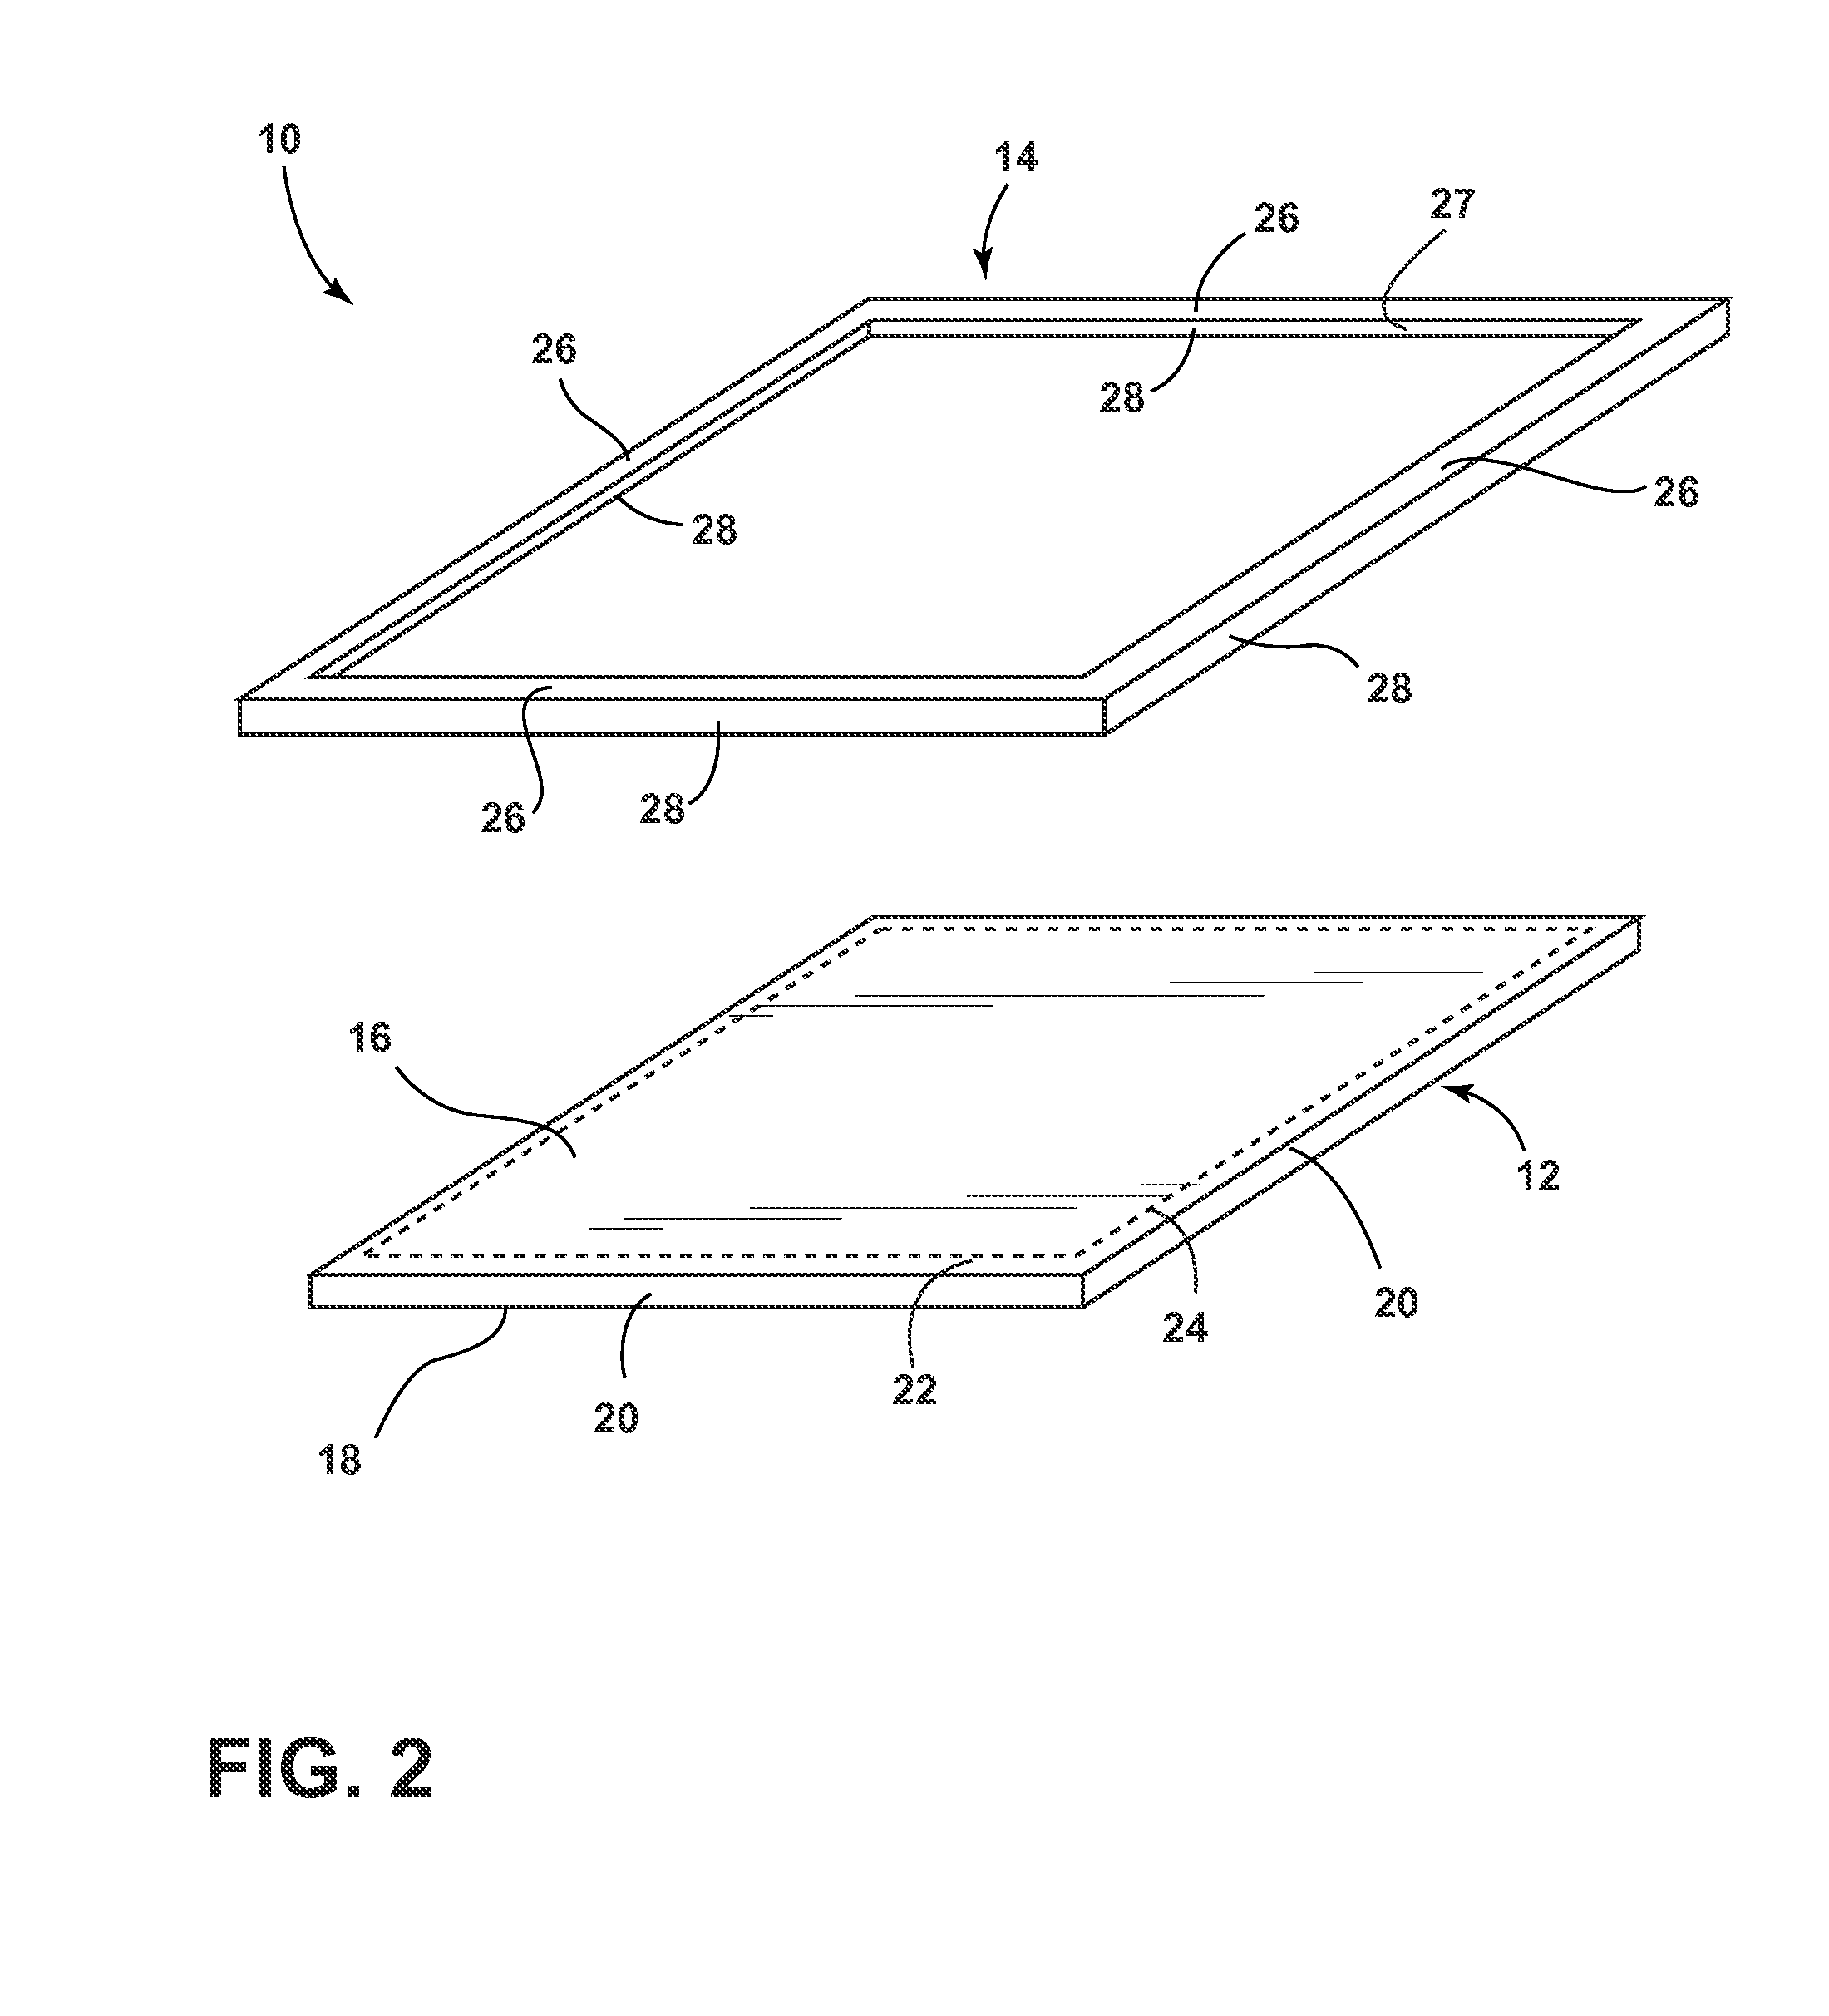 Method of encapsulating a projection and making an evacuated cabinet